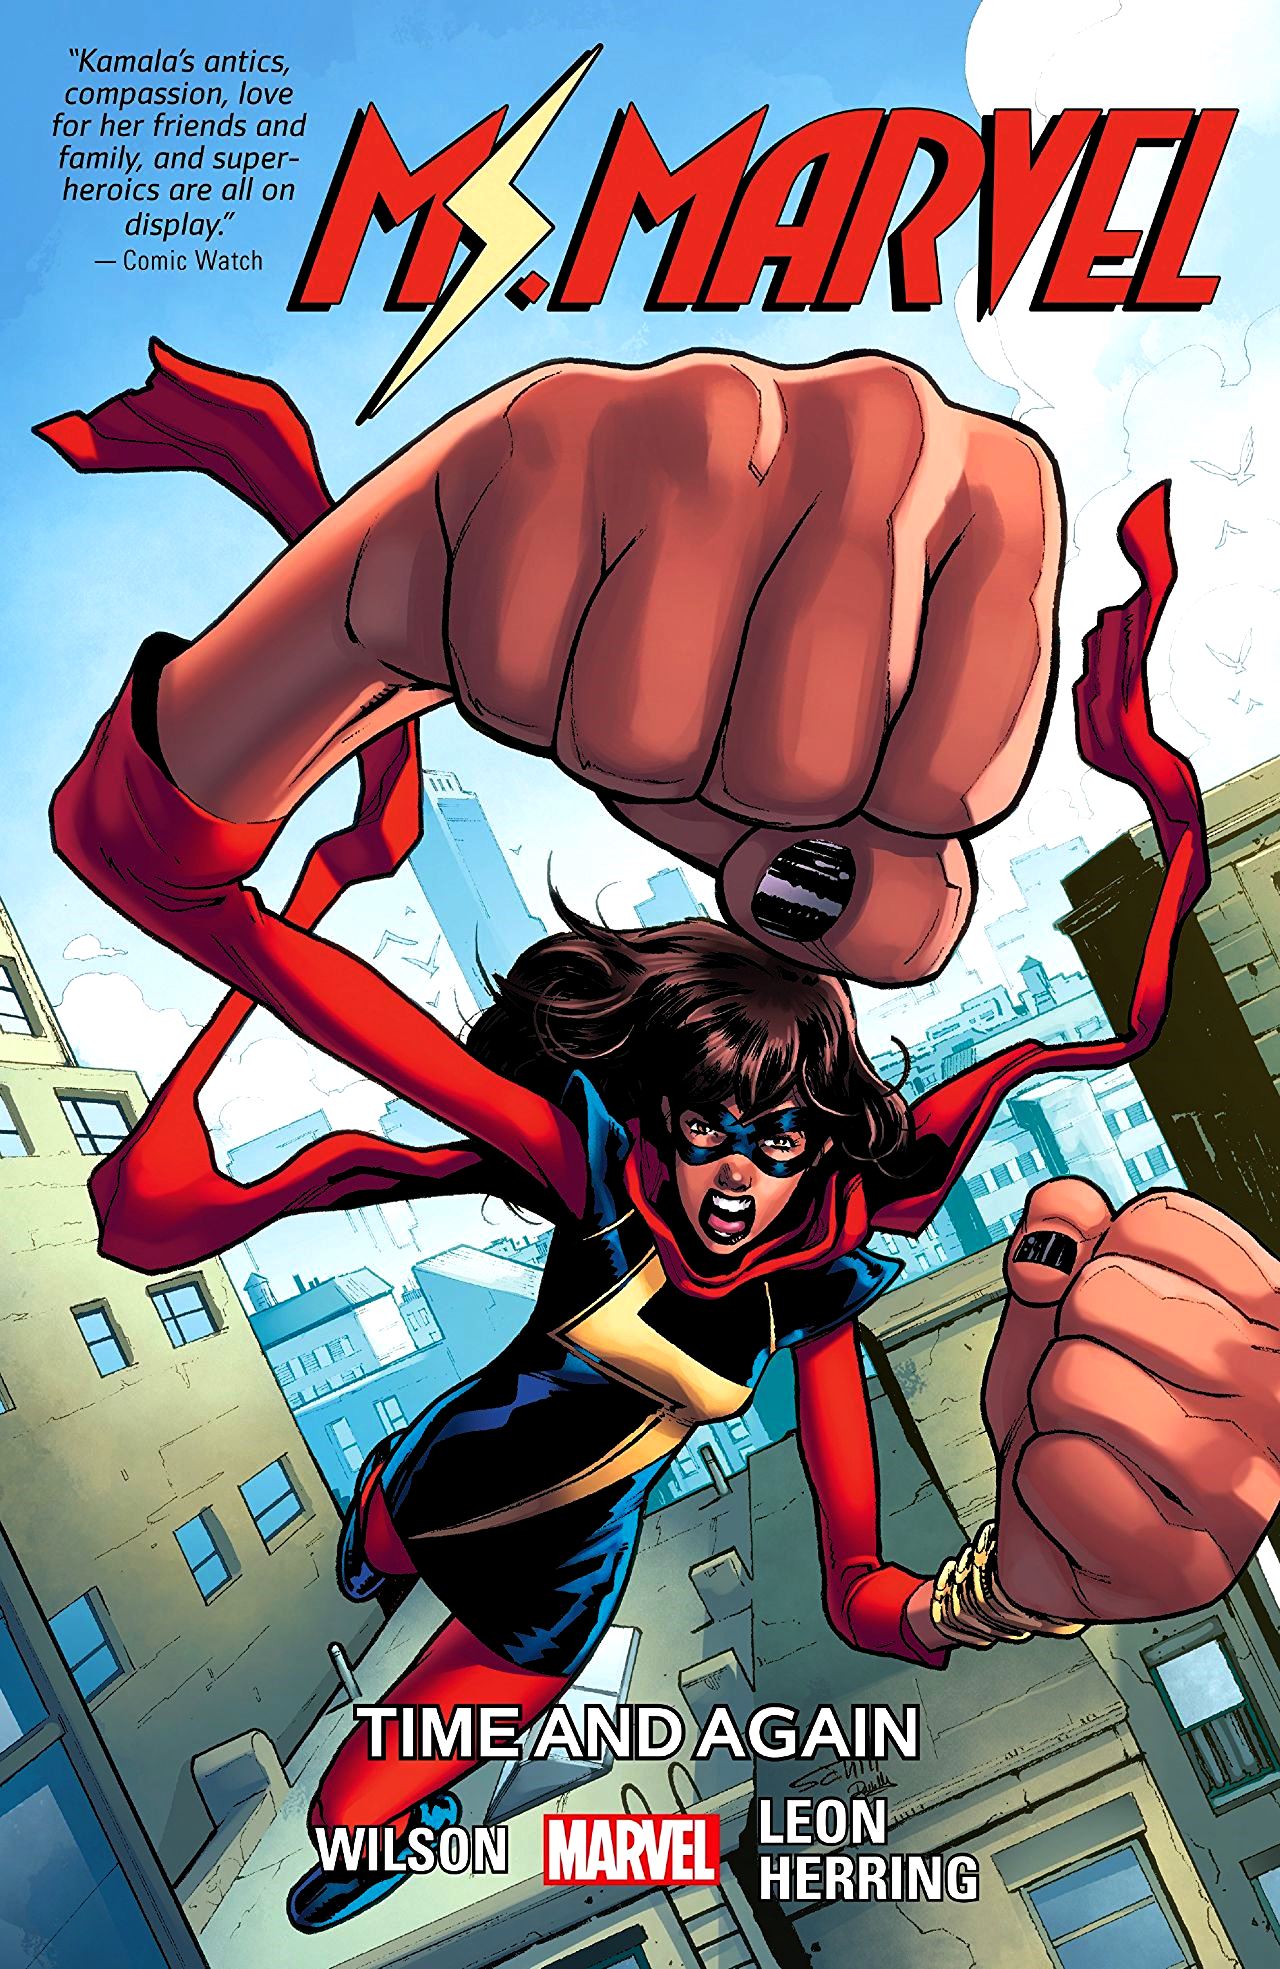 Ms Marvel (2015) Volume 10: Time and Again